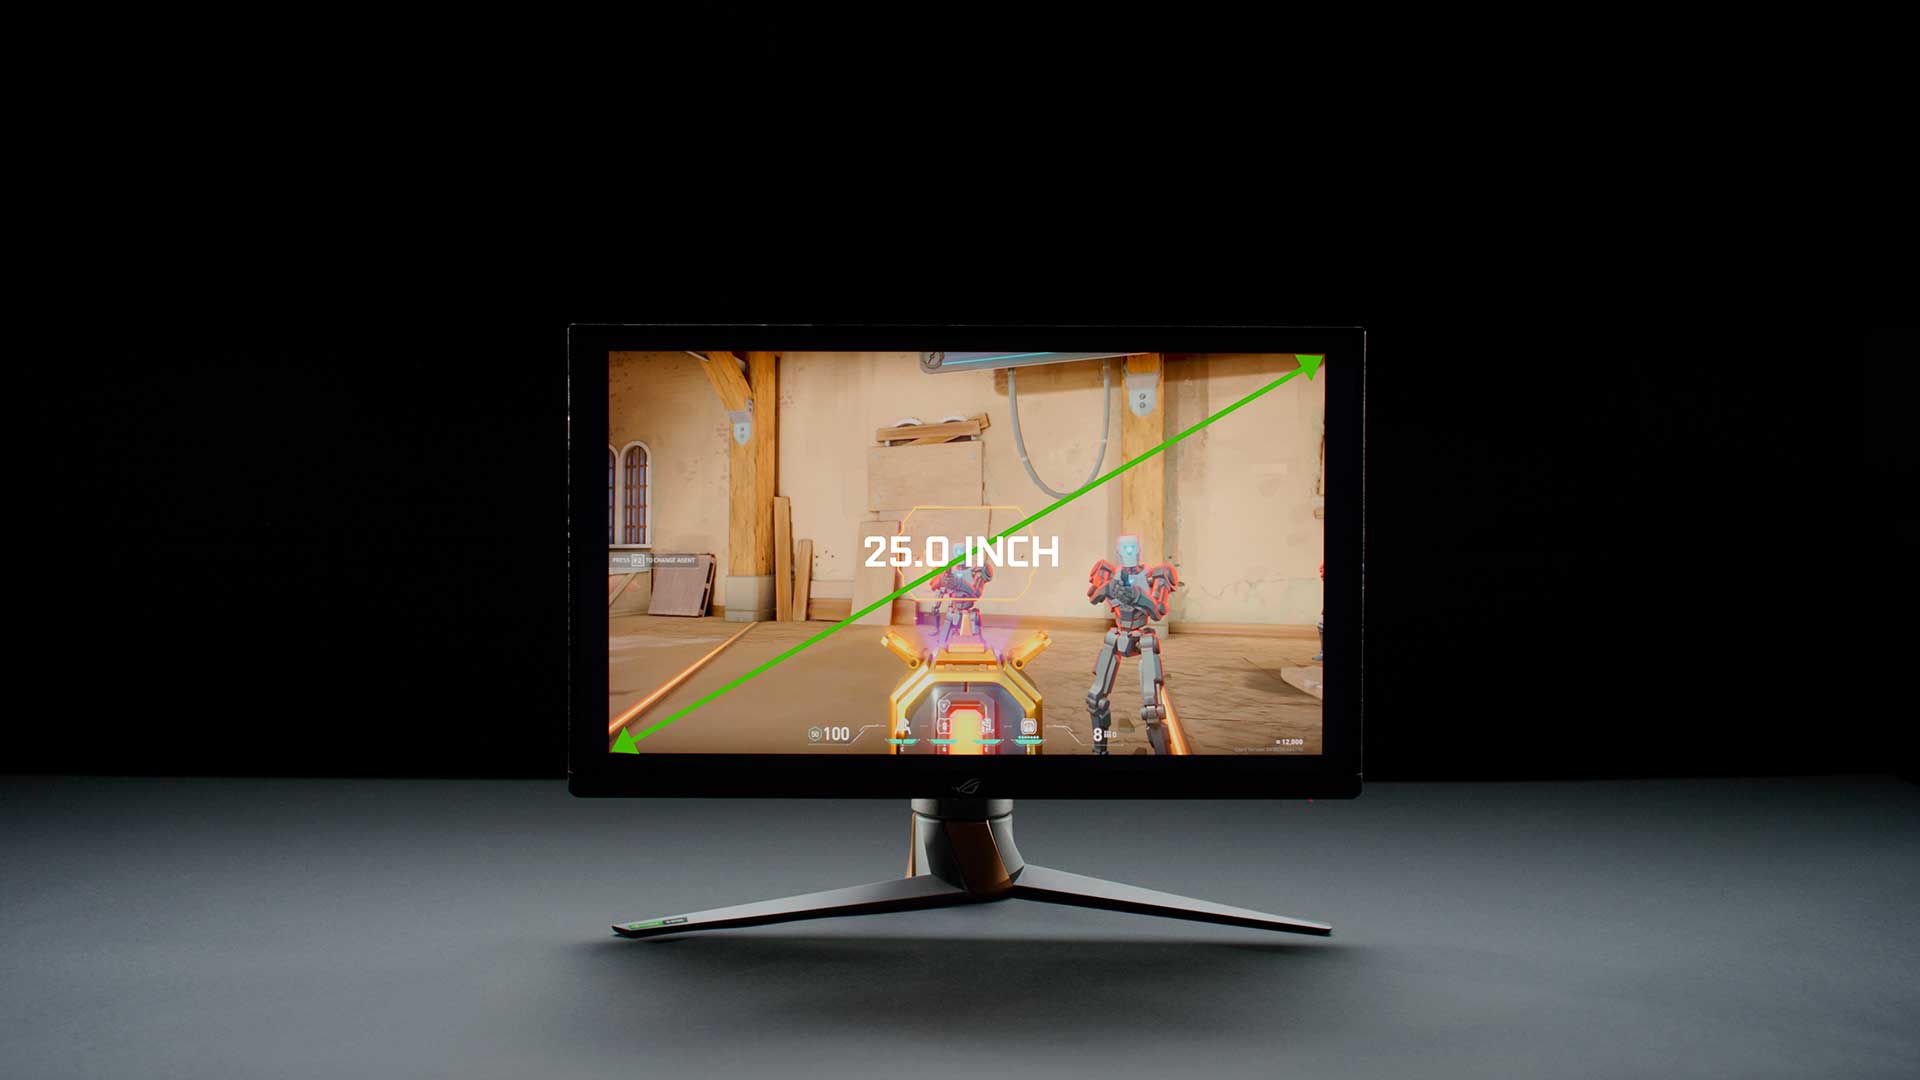 Nvidia and its partners introduce new 1440p monitors for eSports, with up to 360Hz